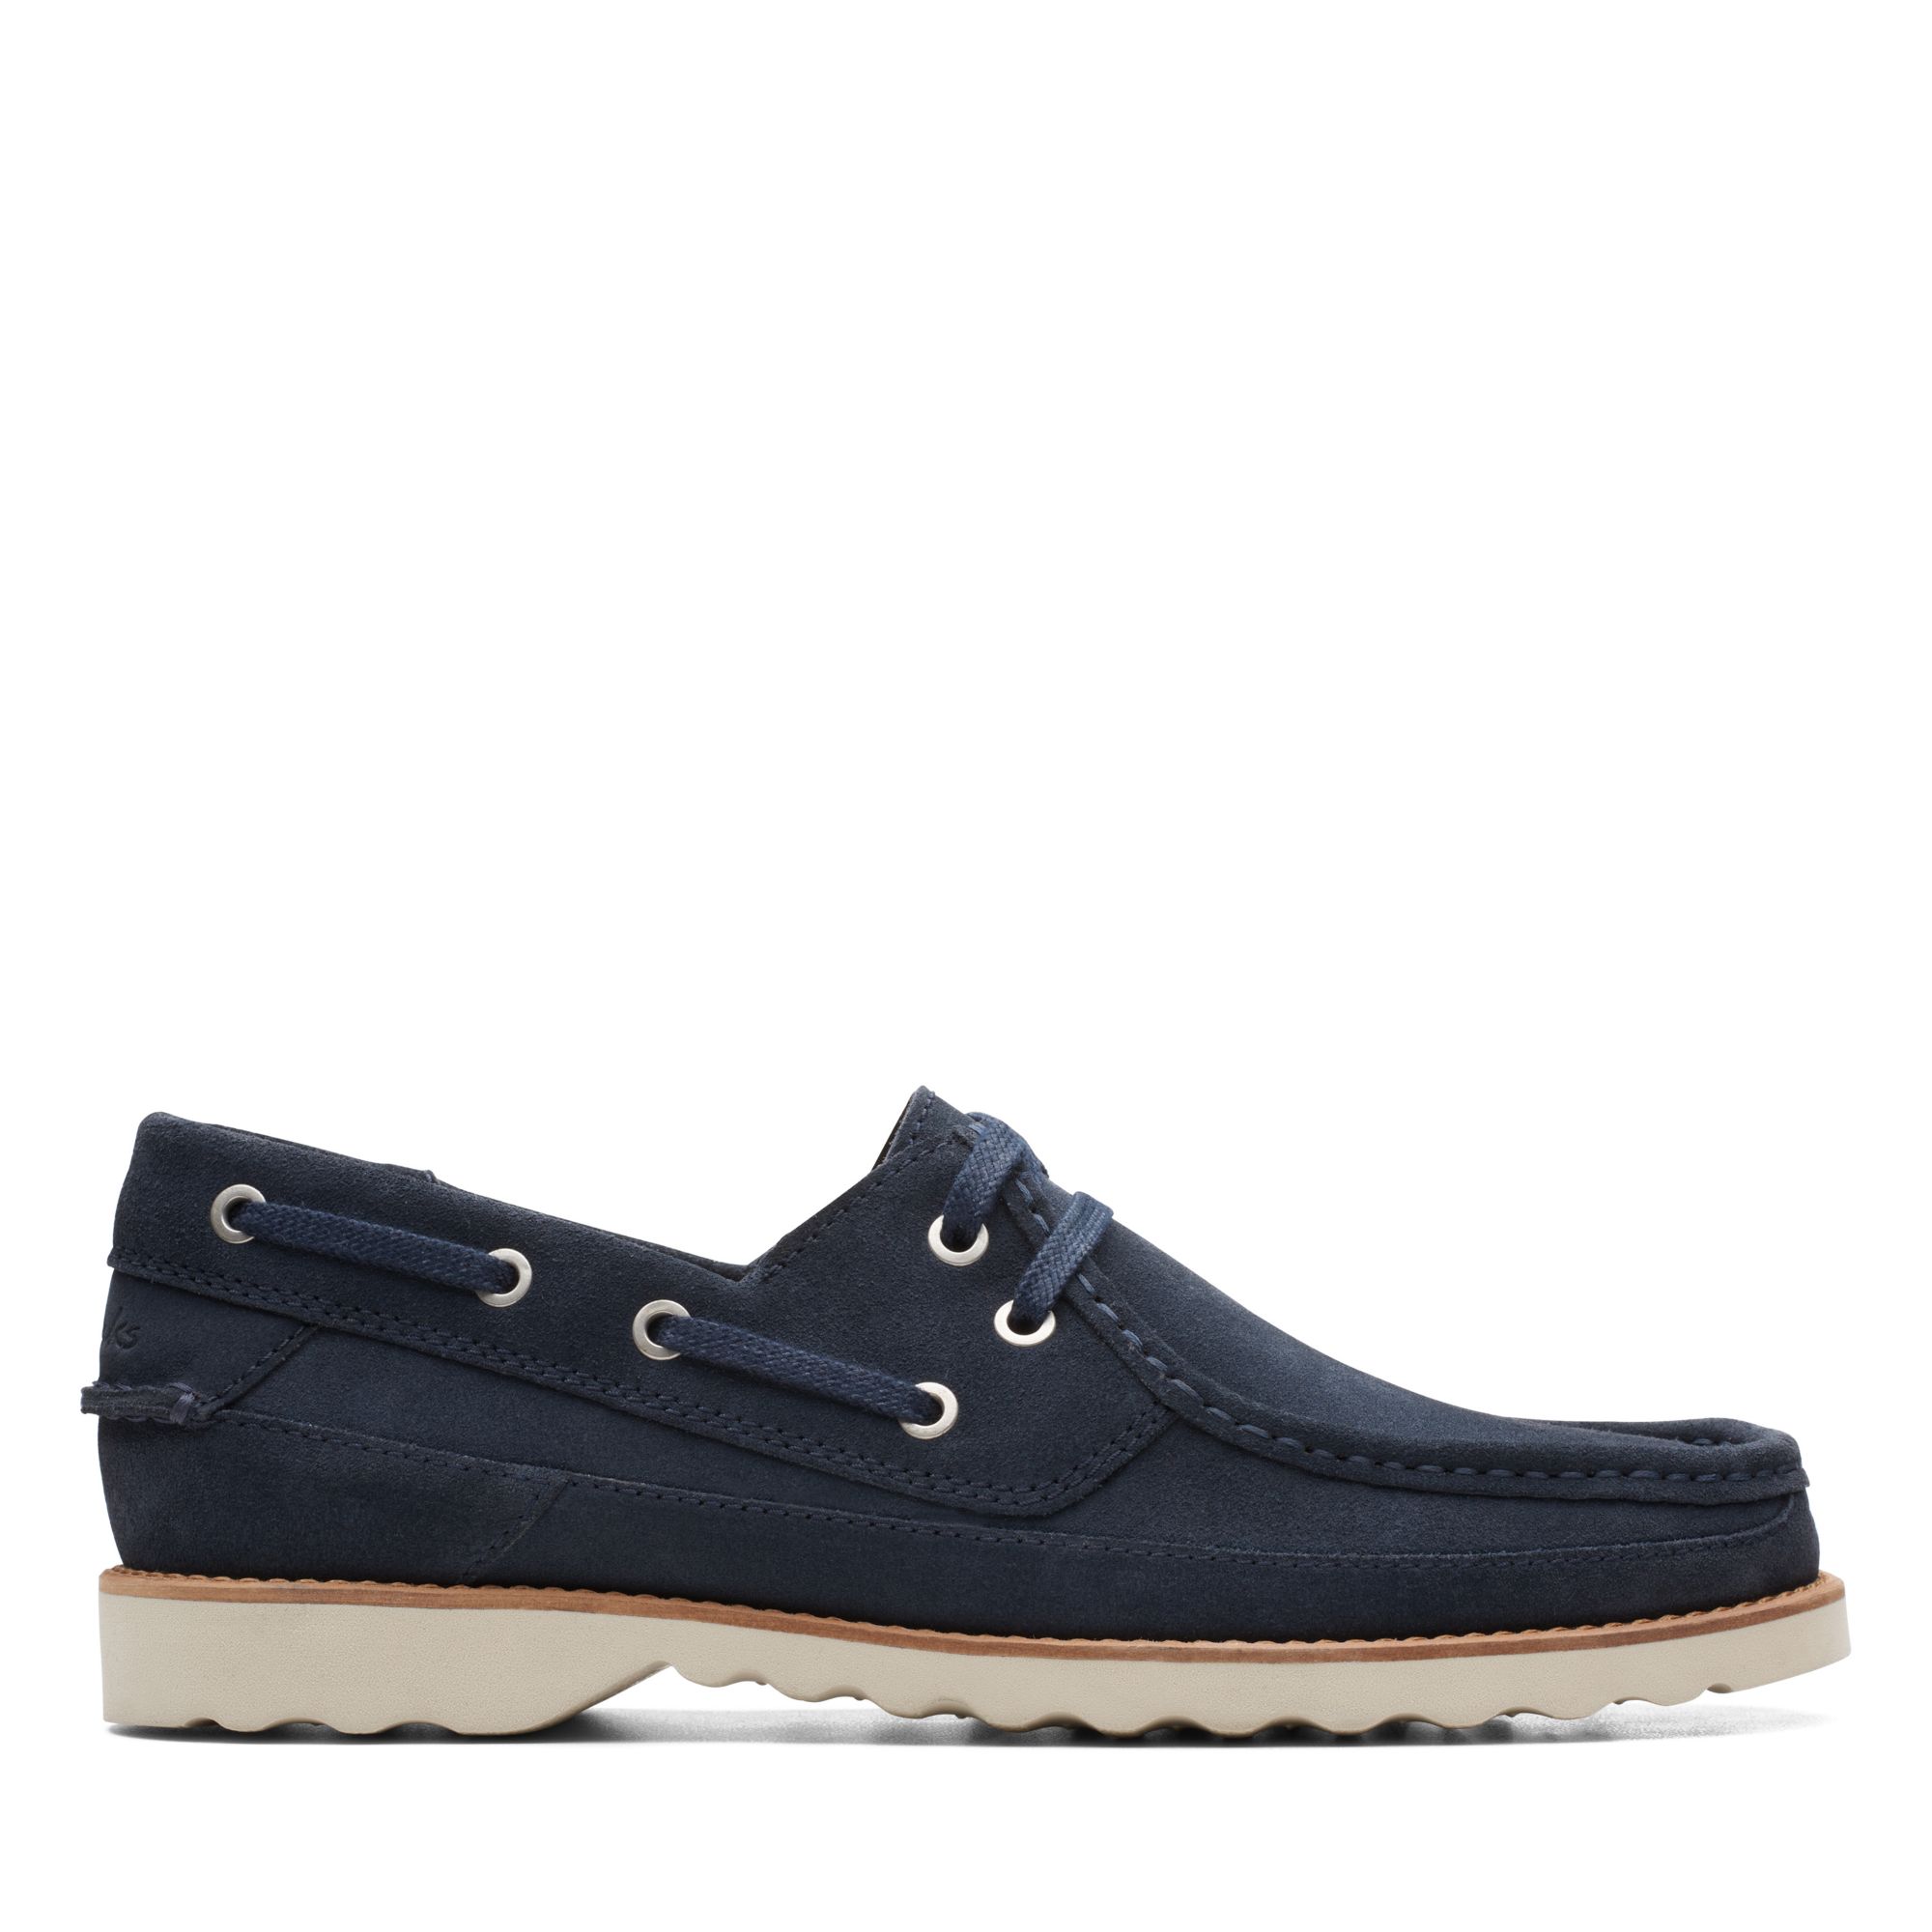 Clarks Men's Durleigh Sail Navy Suede Shoes (3 color options)